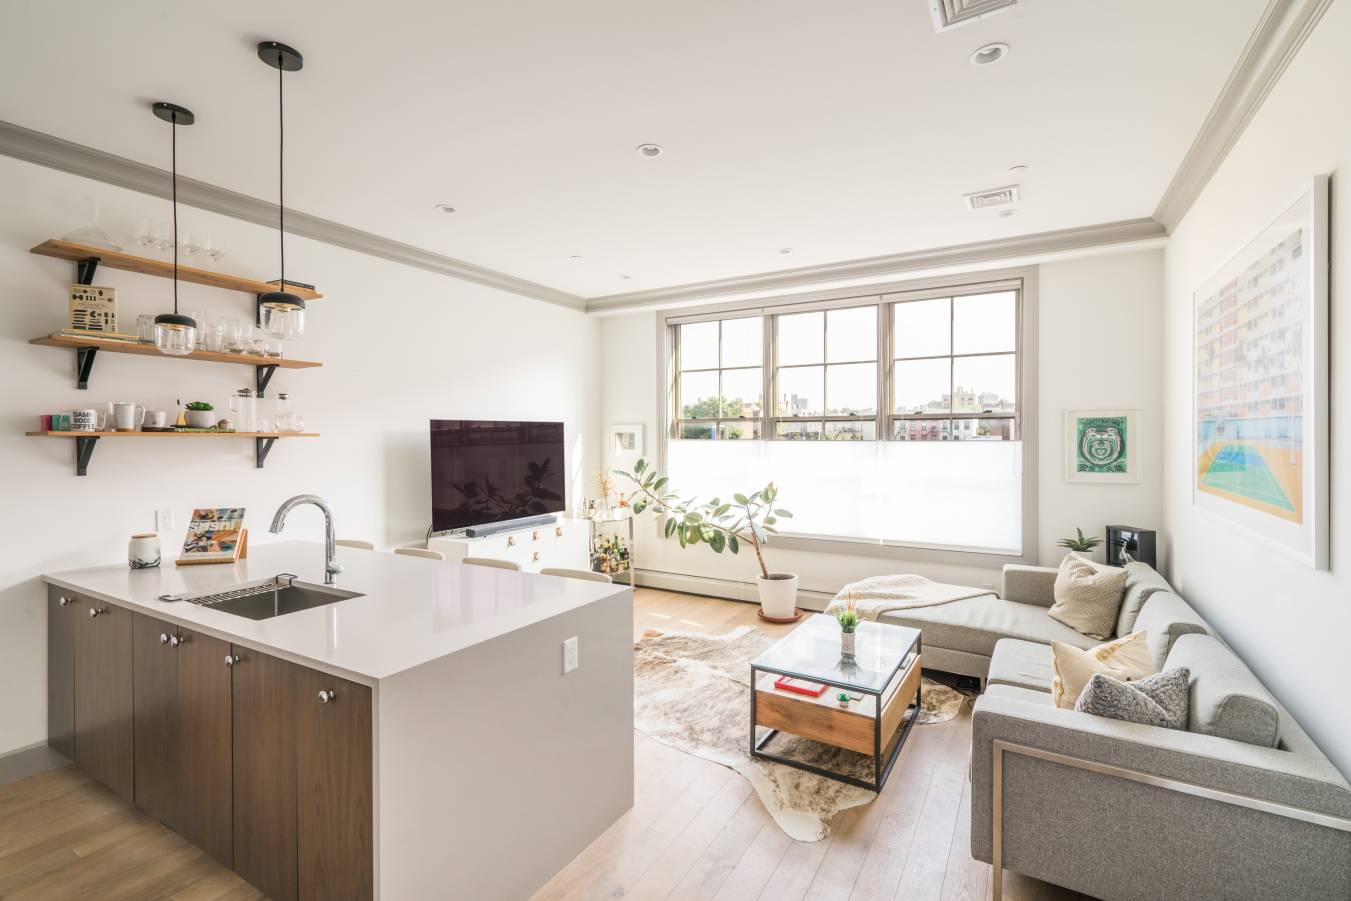 Welcome home to this beautiful one bedroom 1 Bed 1 Bath condo that merges modern living with classic design in a new townhouse development along a historic tree lined street ...